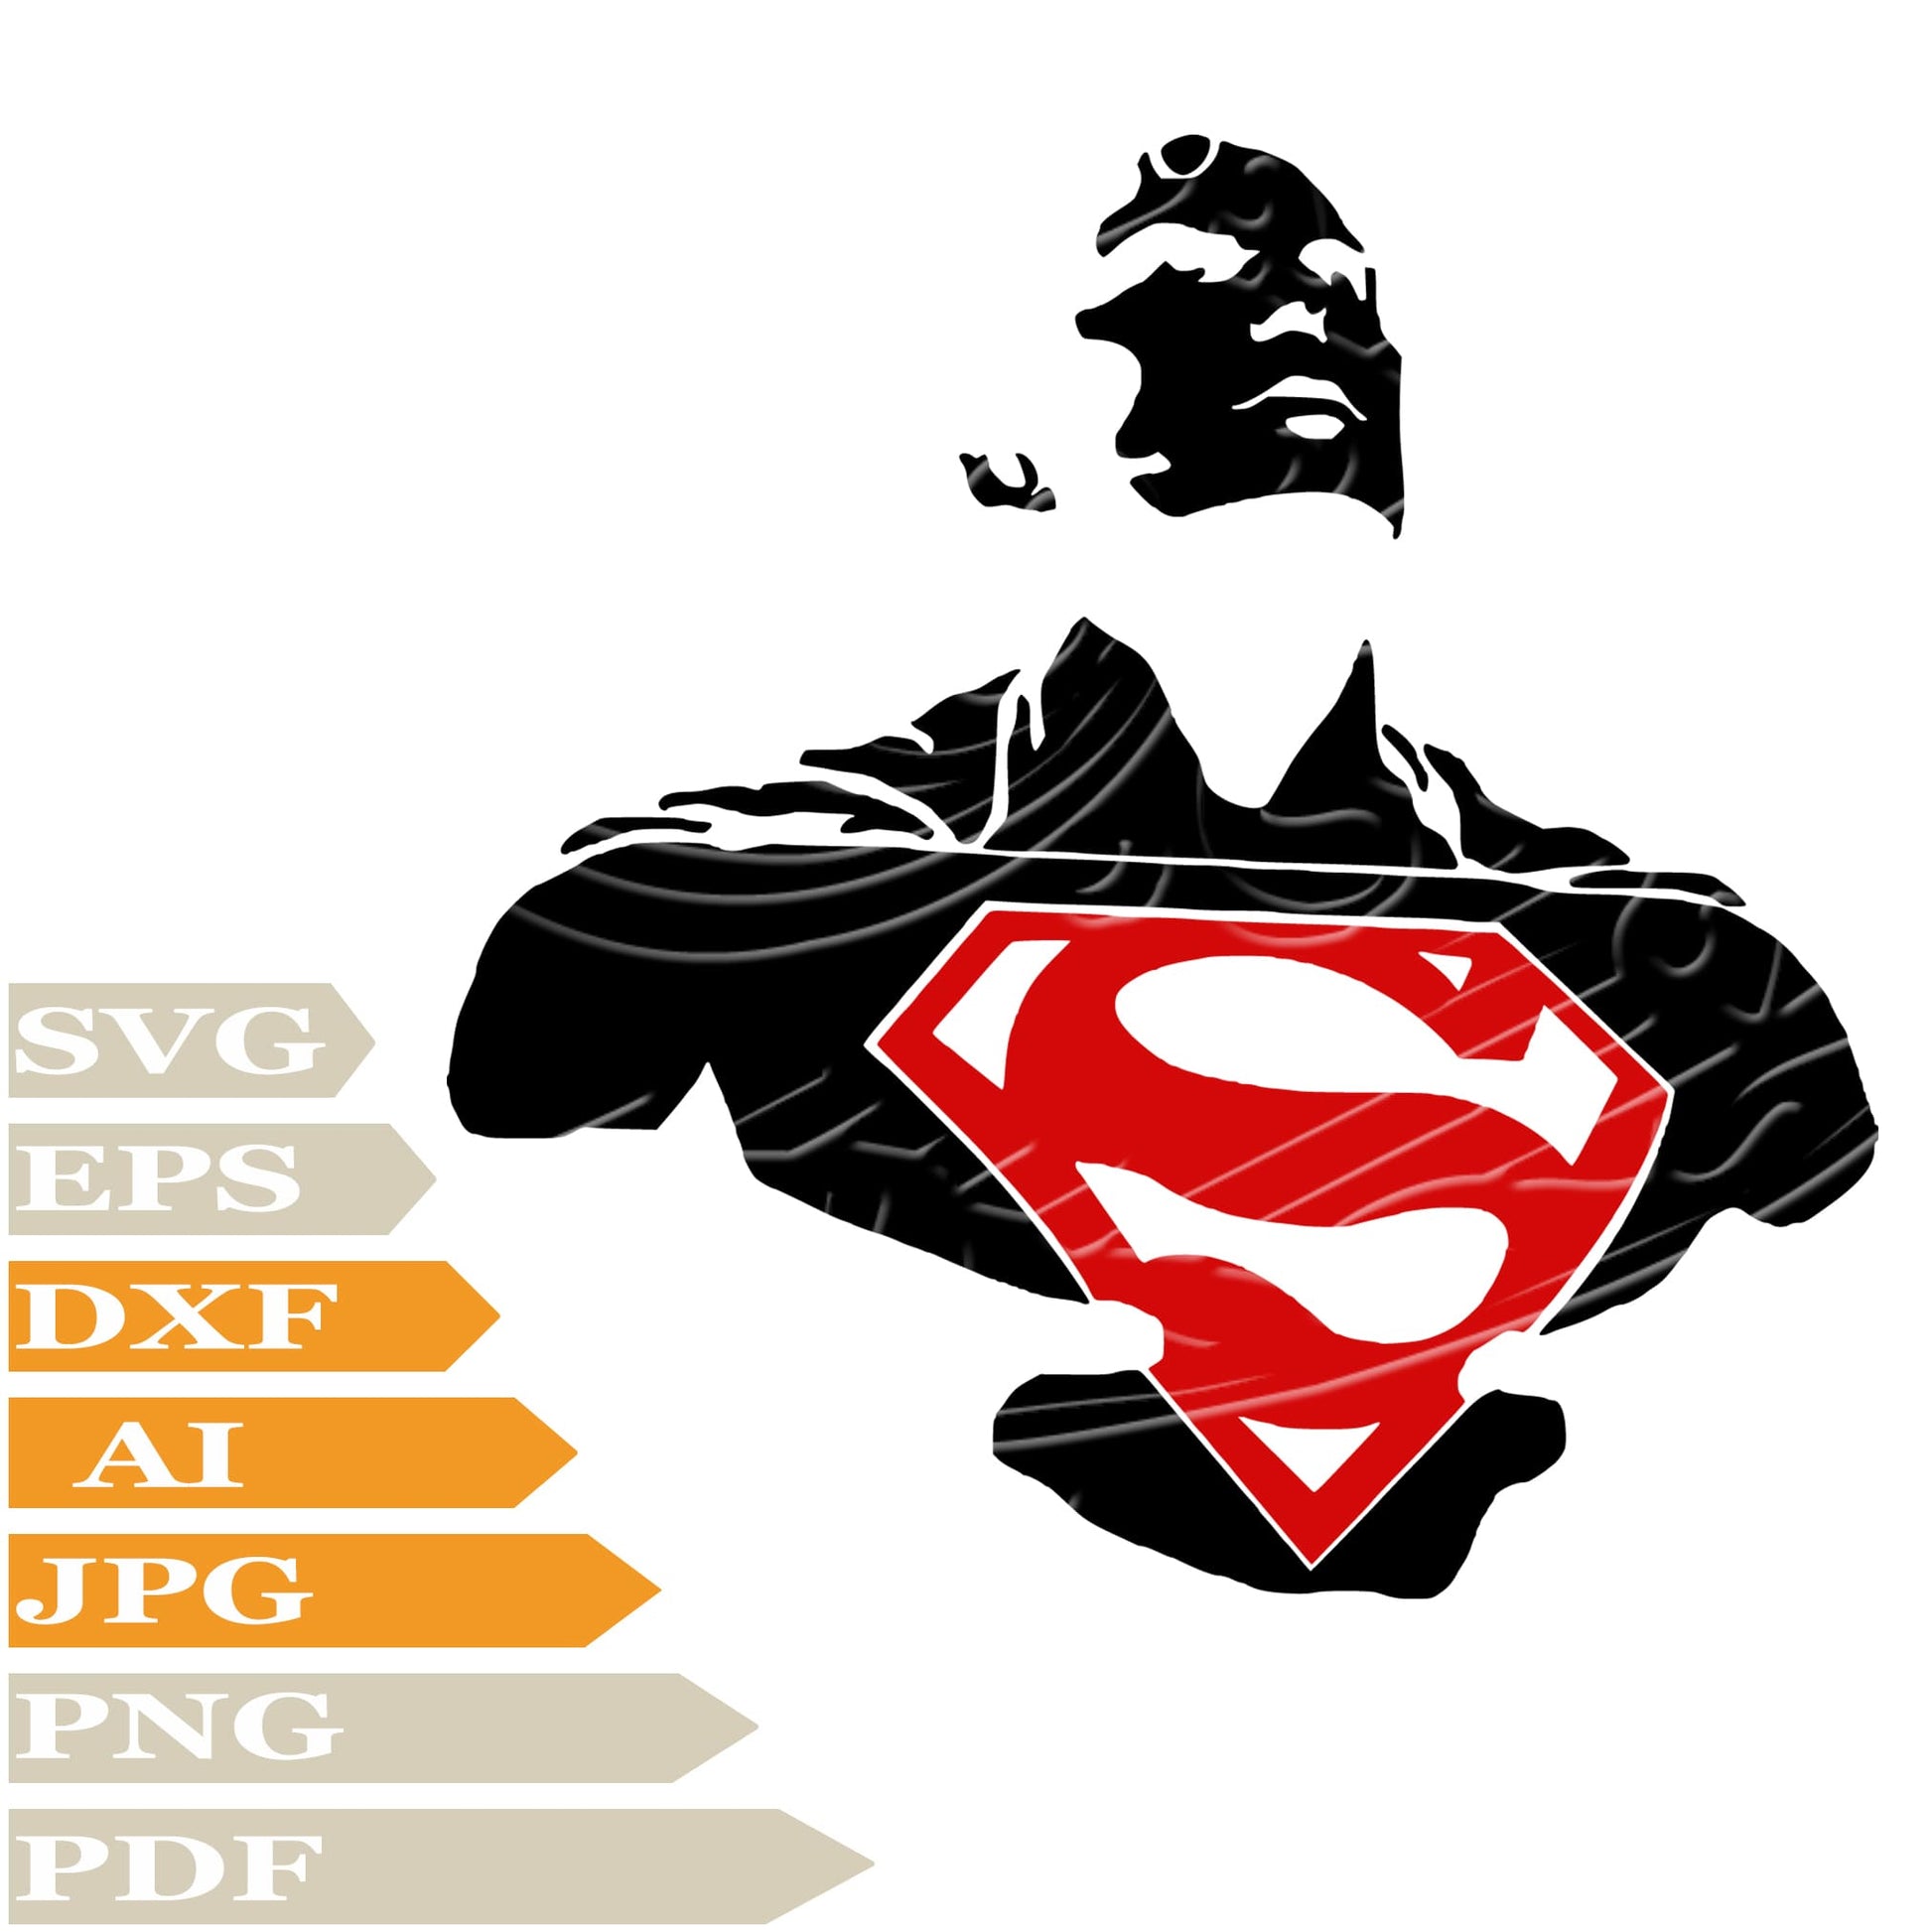 Superman, Super Man Svg File, Image Cut, Png, For Tattoo, Silhouette, Digital Vector Download, Cut File, Clipart, For Cricut